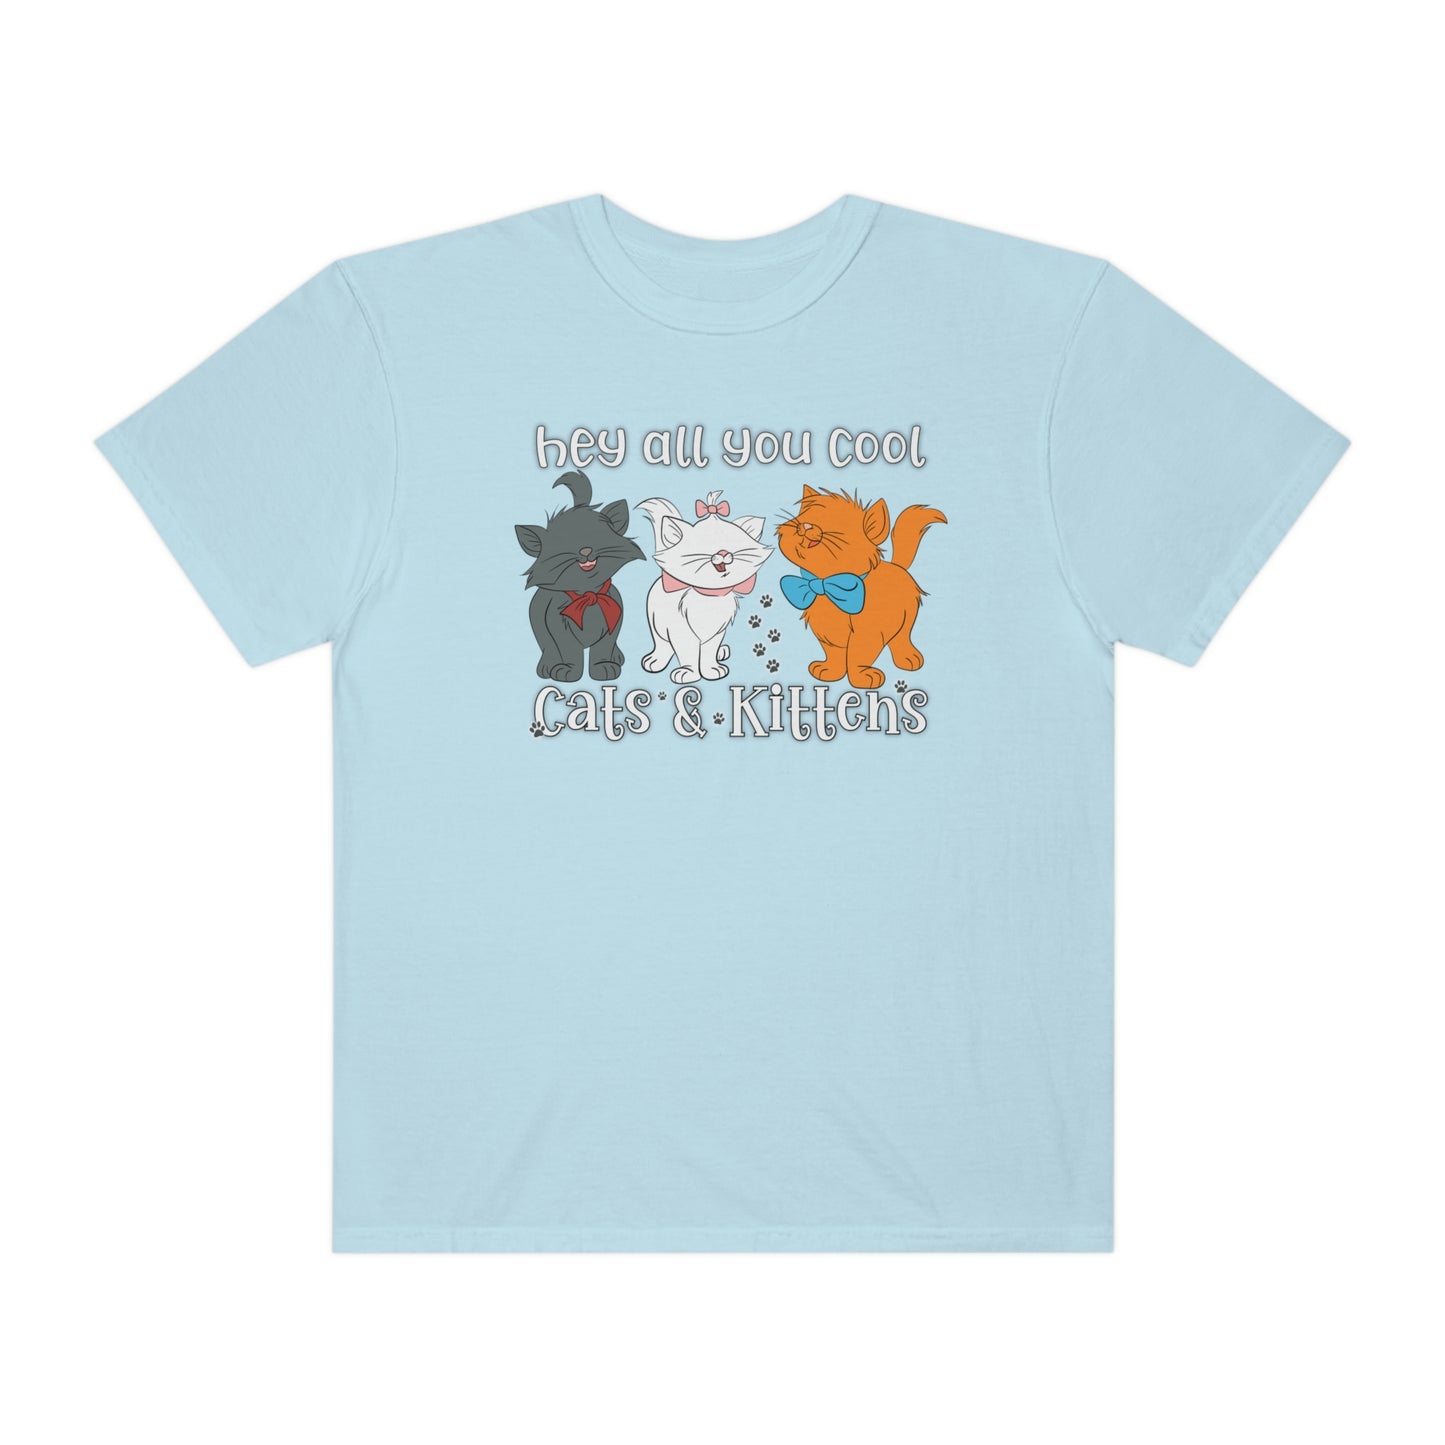 Cool Cats & Kittens Solid Adult Unisex Tee